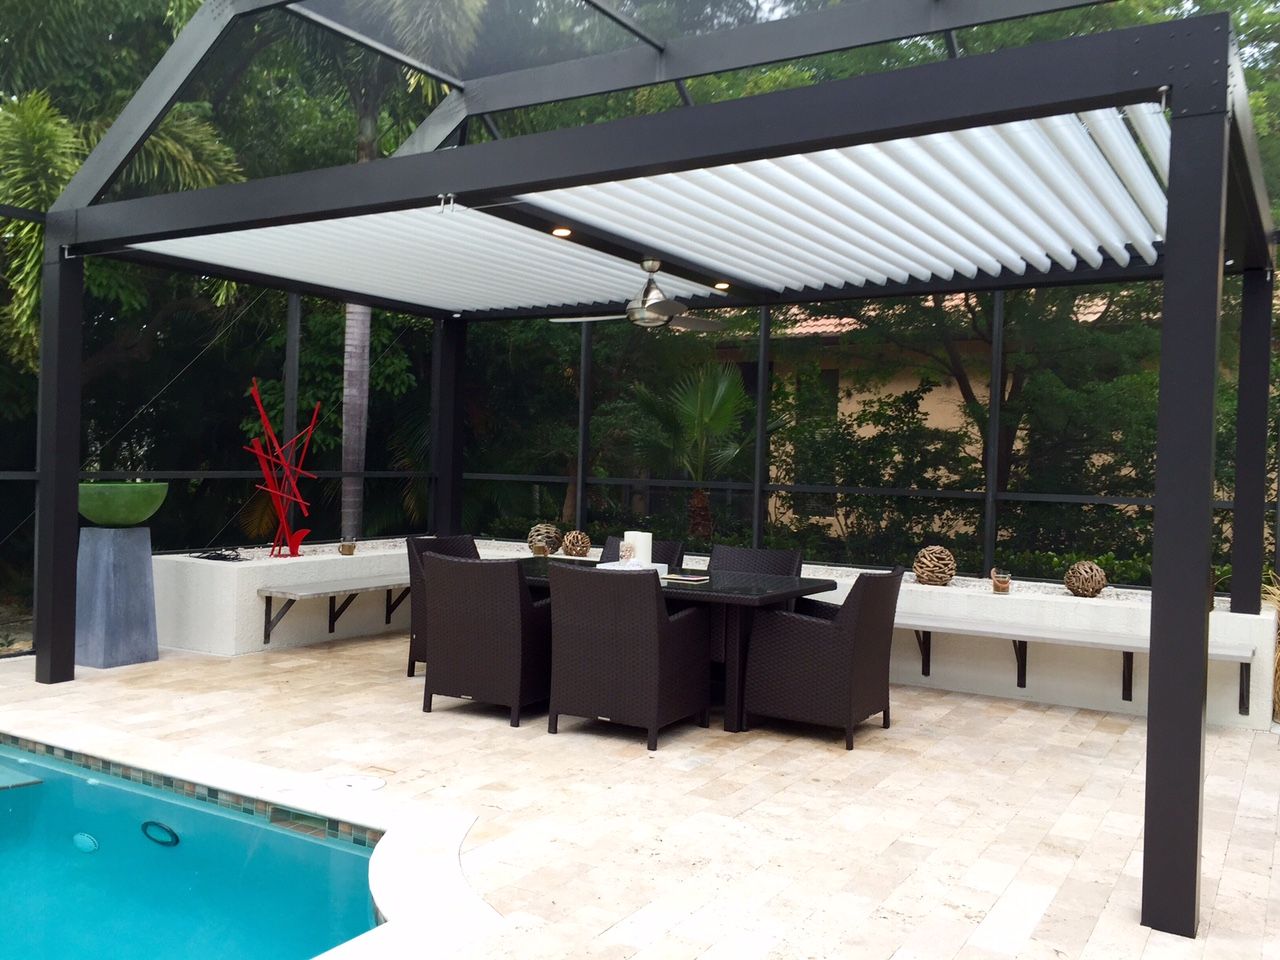 Featured image for post: Benefits of Purchasing a Pergola for Your Outdoor Living Space